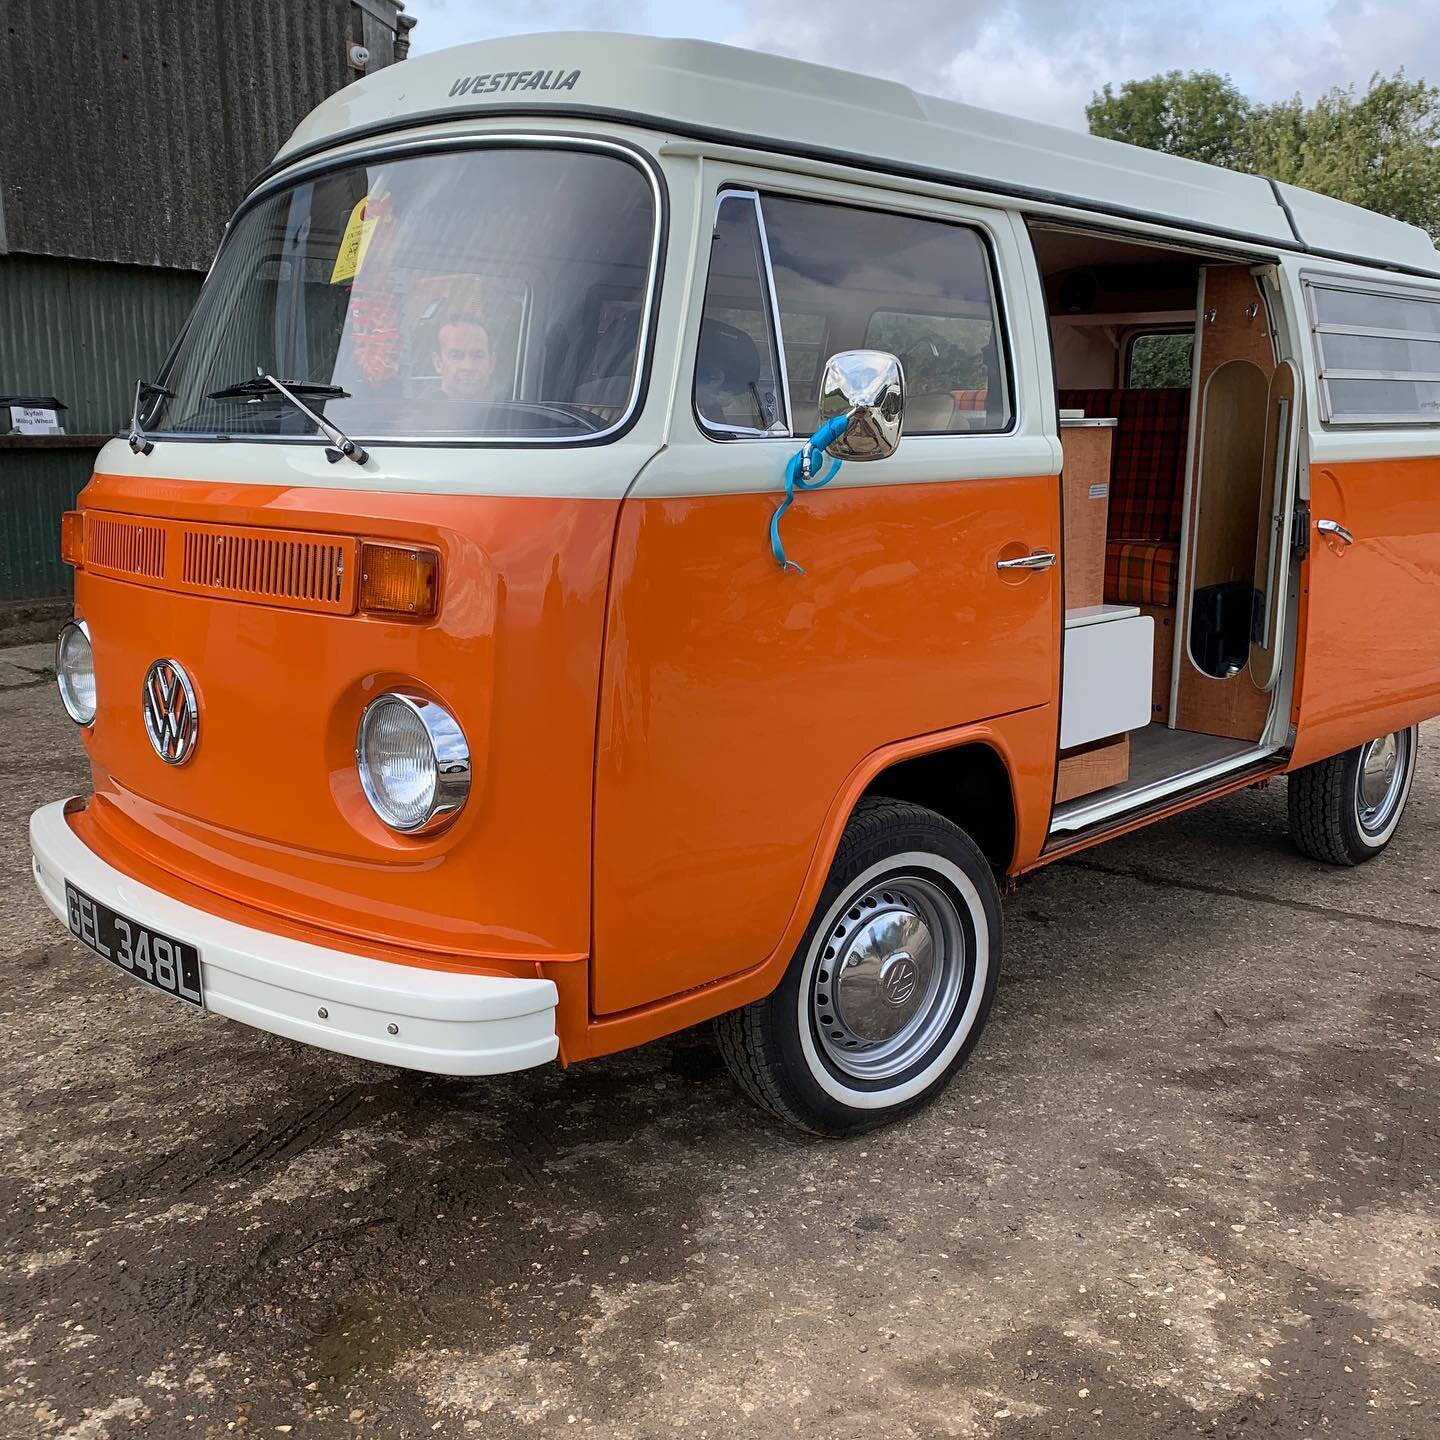 Mint 73 RHD Westy joined us for safe keeping while its owners are off touring Australia. #hvsuk #classiccarstorageuk #camperstorageuk #vwcamper #wolfsburgbuscrew #vwwestfalia #baywindow #aircooledvw #vwtype2 🏕🚌______________________________________